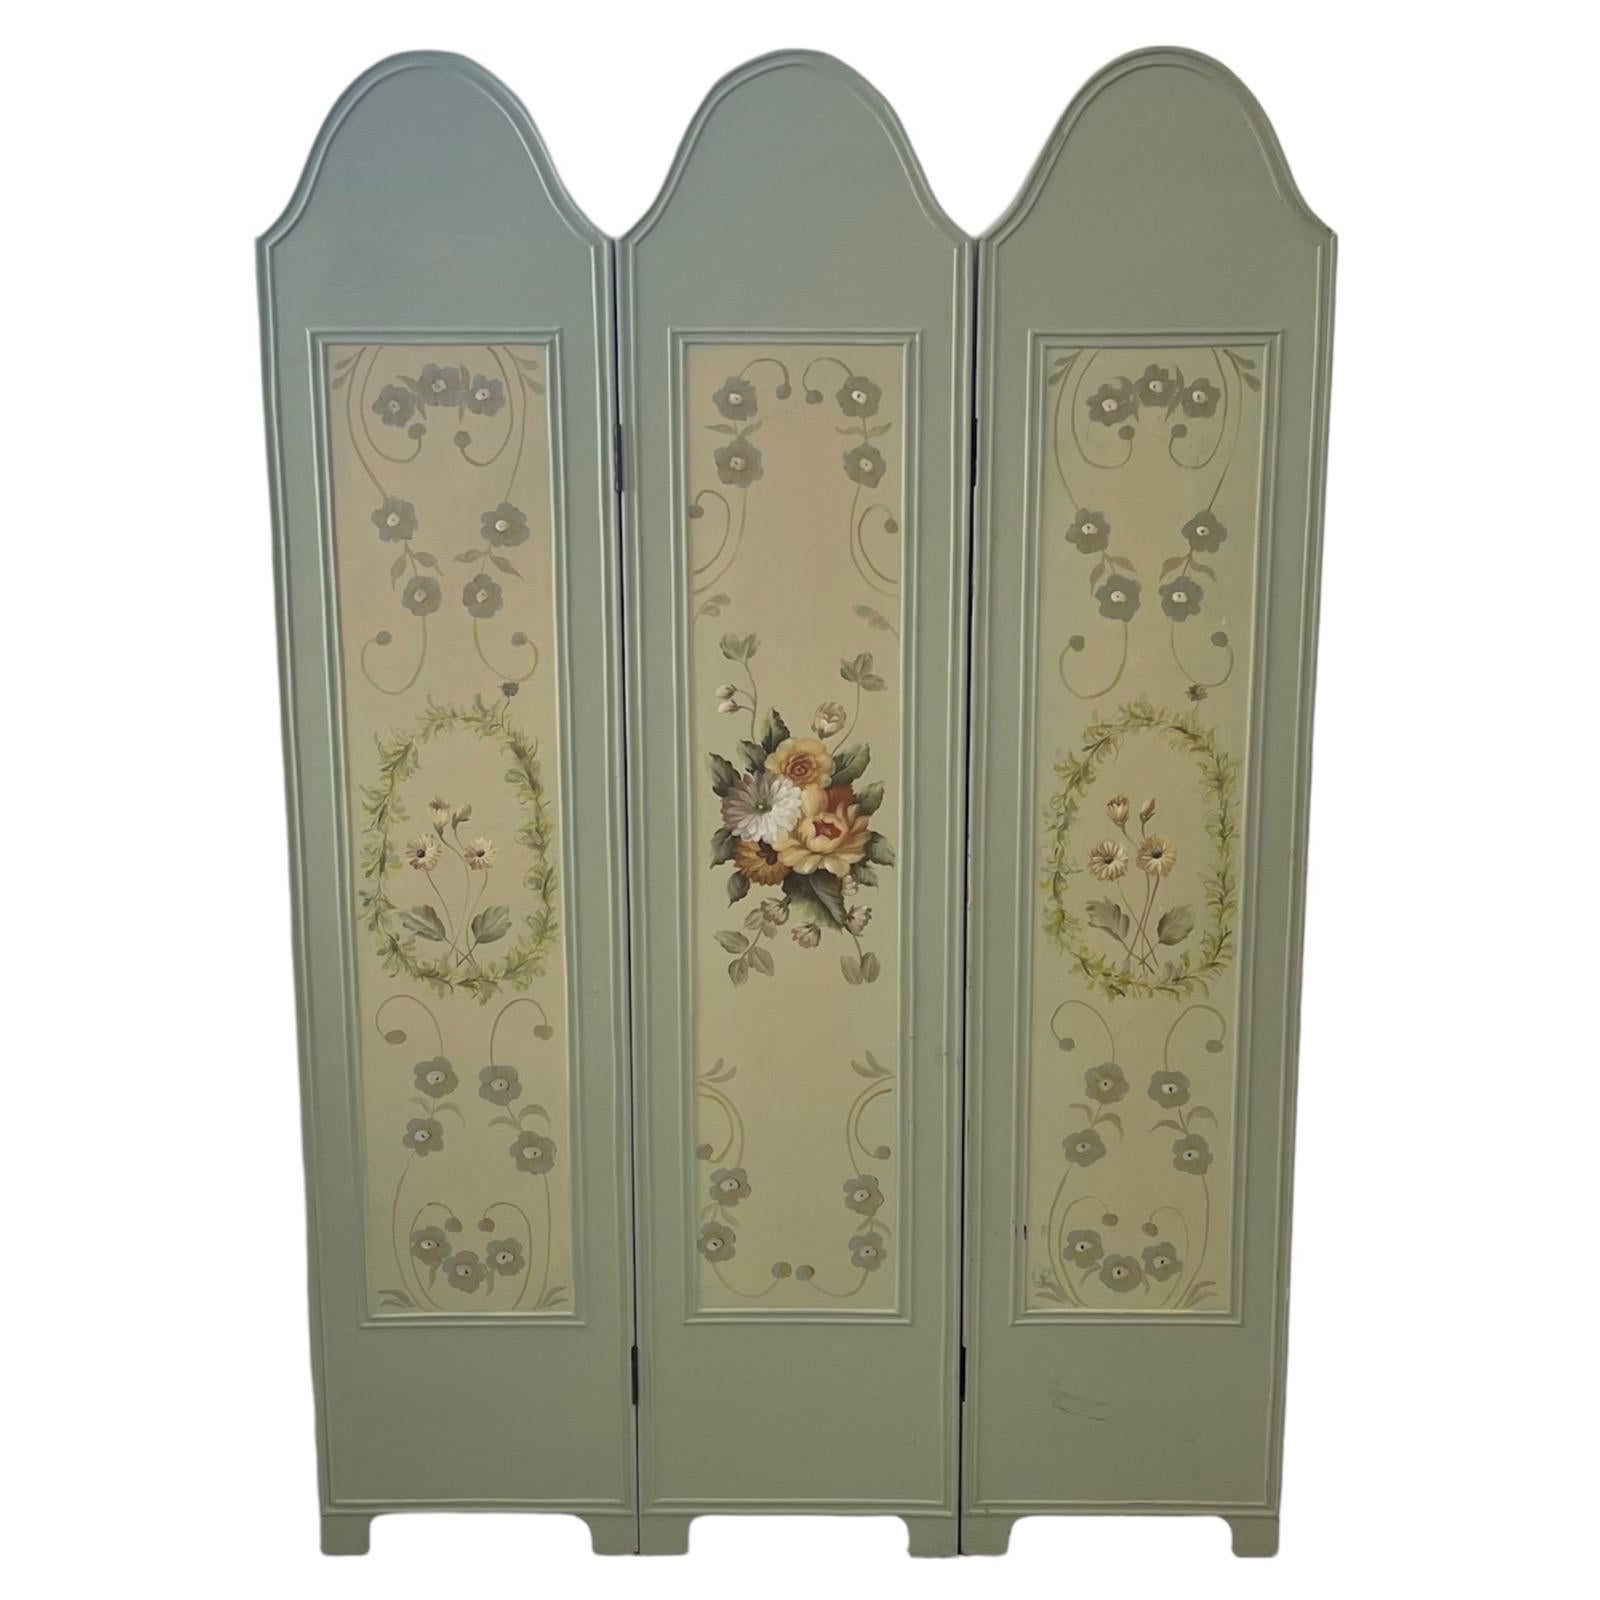 Vintage Hand Painted Three Panel French Wood Room Divider or Partition Screen For Sale